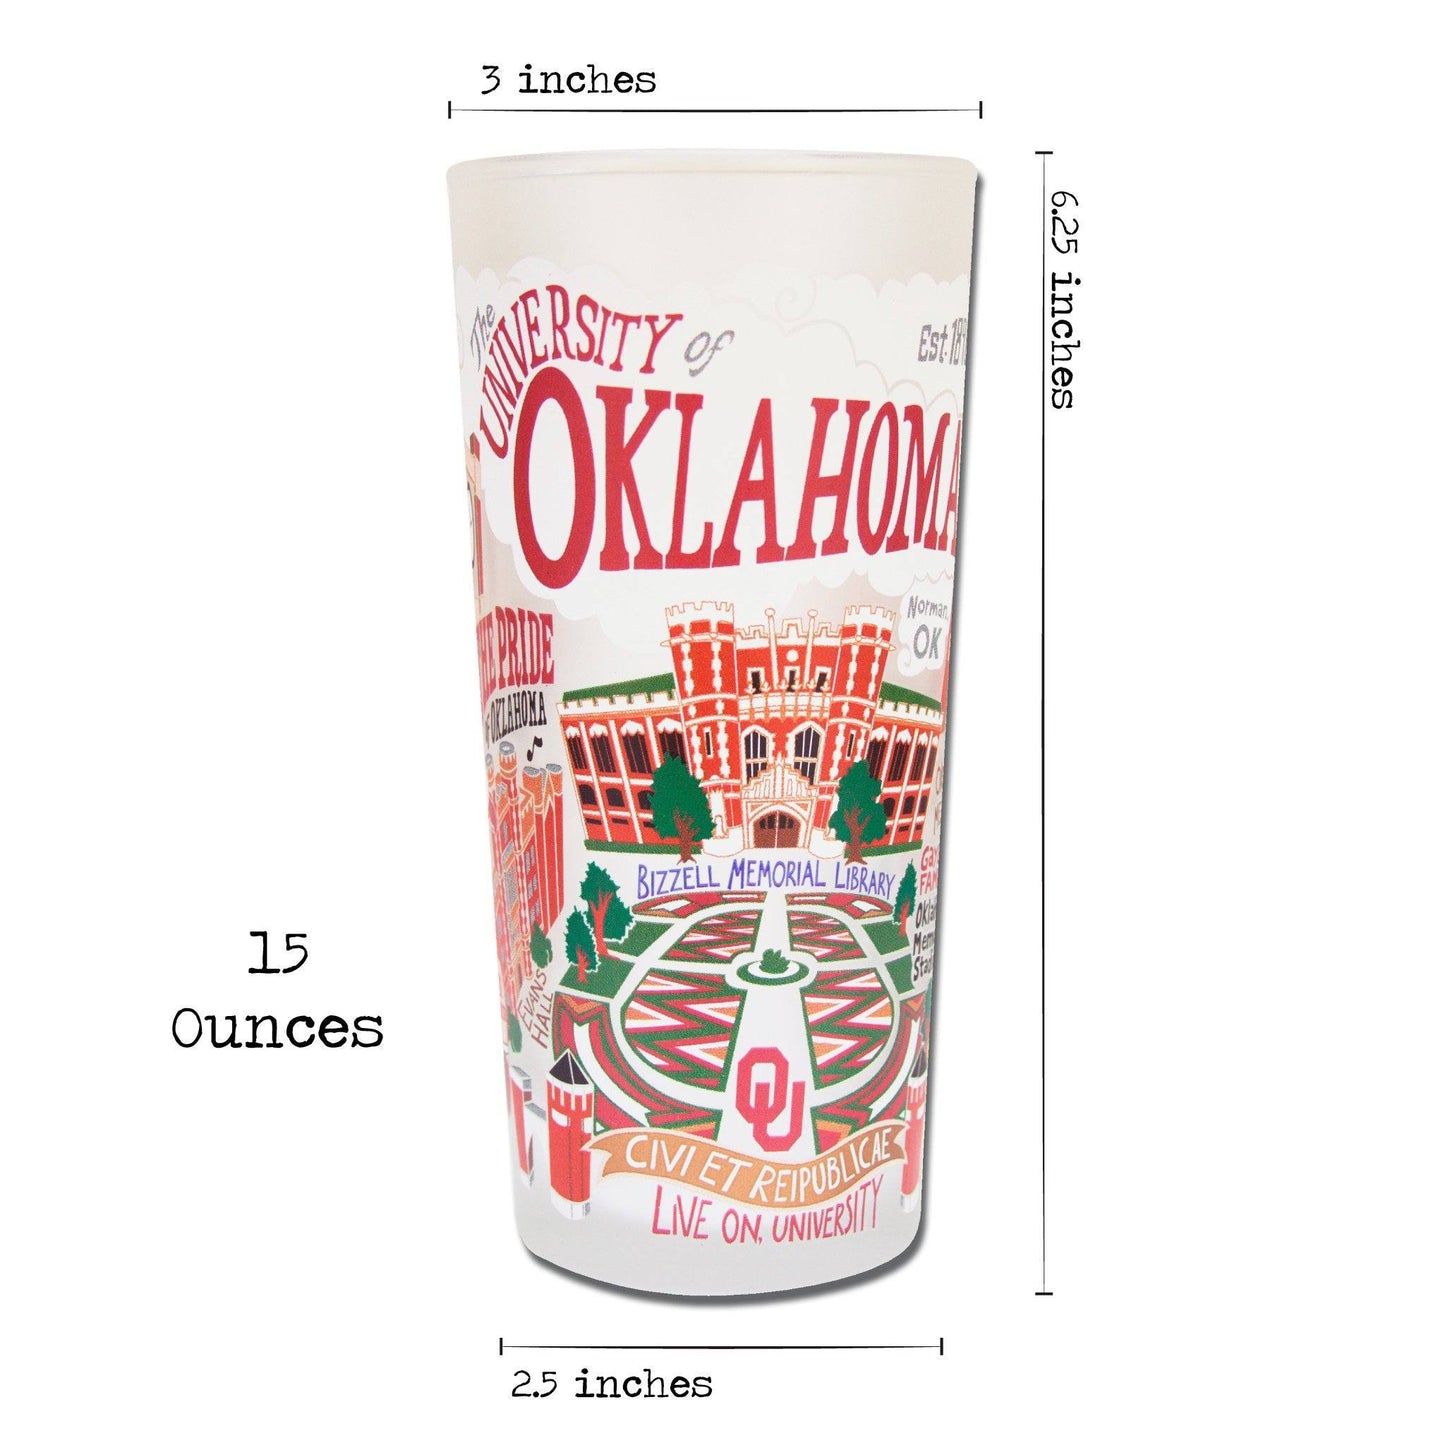 Oklahoma University OU frosted drinking glass dishwasher safe 12 ounces boomer sooner norman fans gift